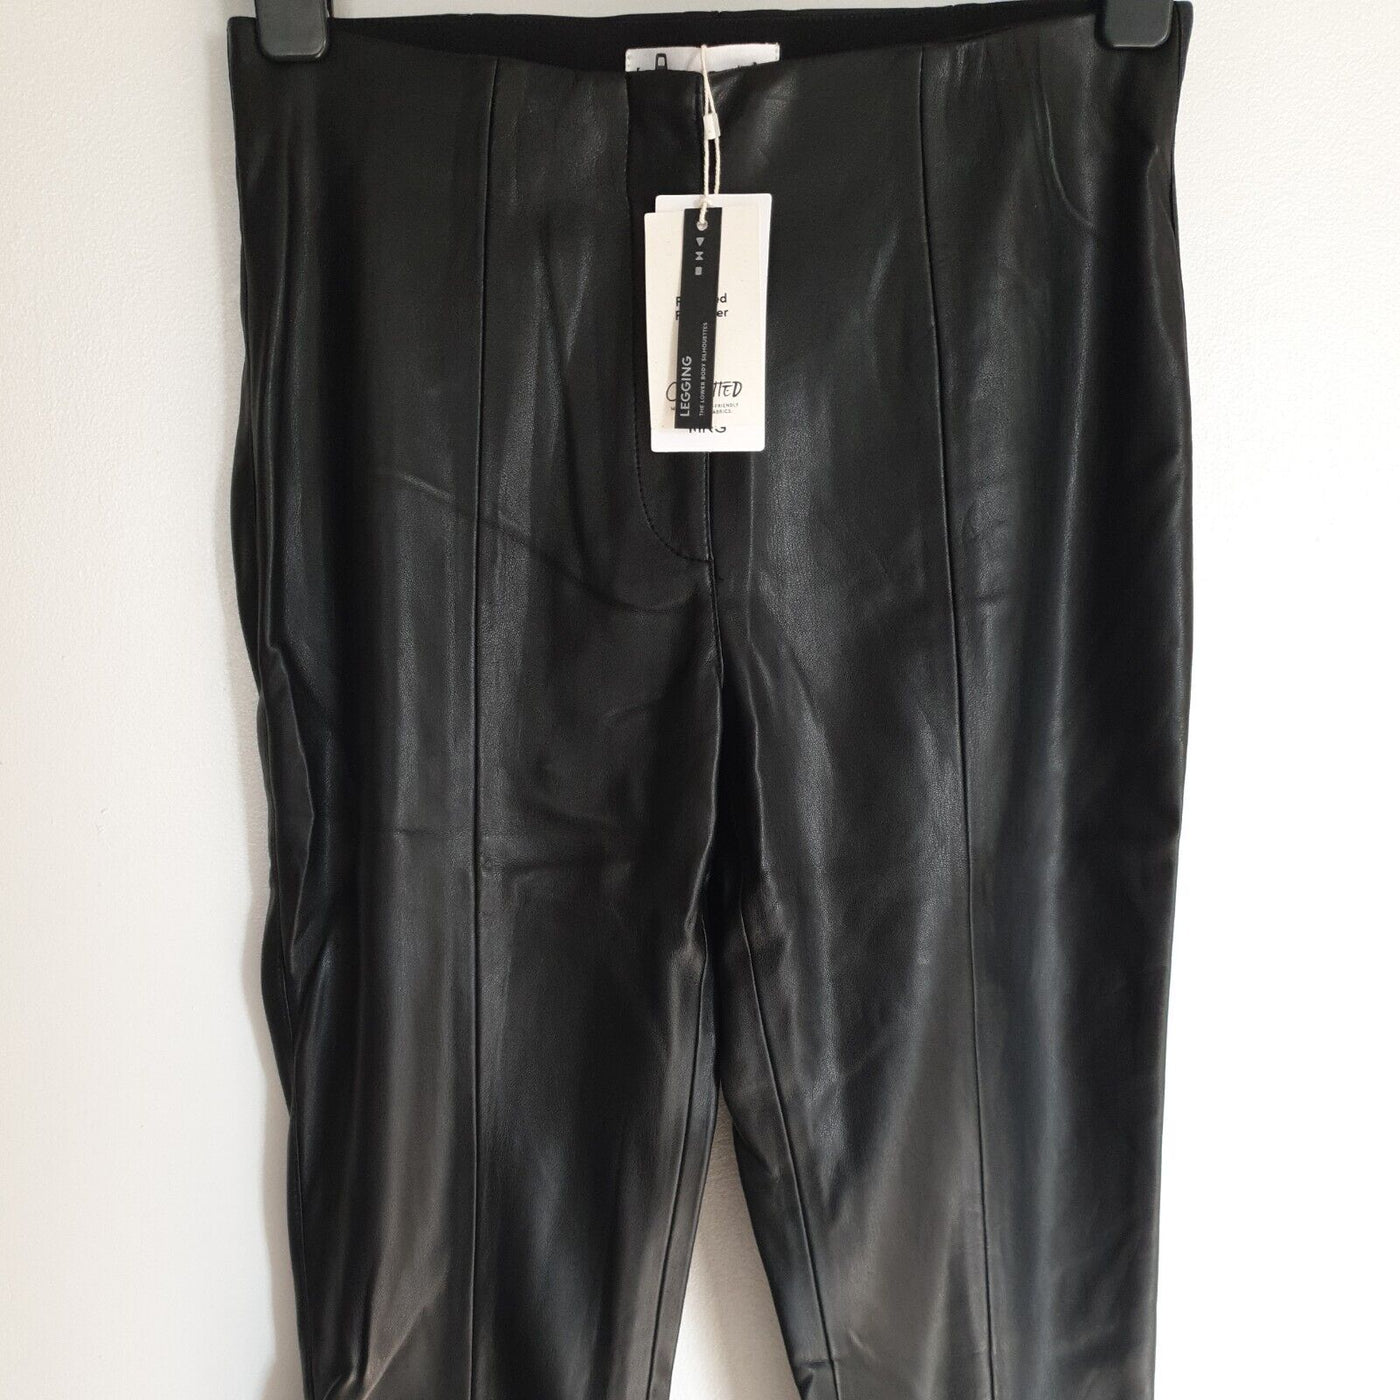 MNG Faux Leather Leggings Size M****Ref V275